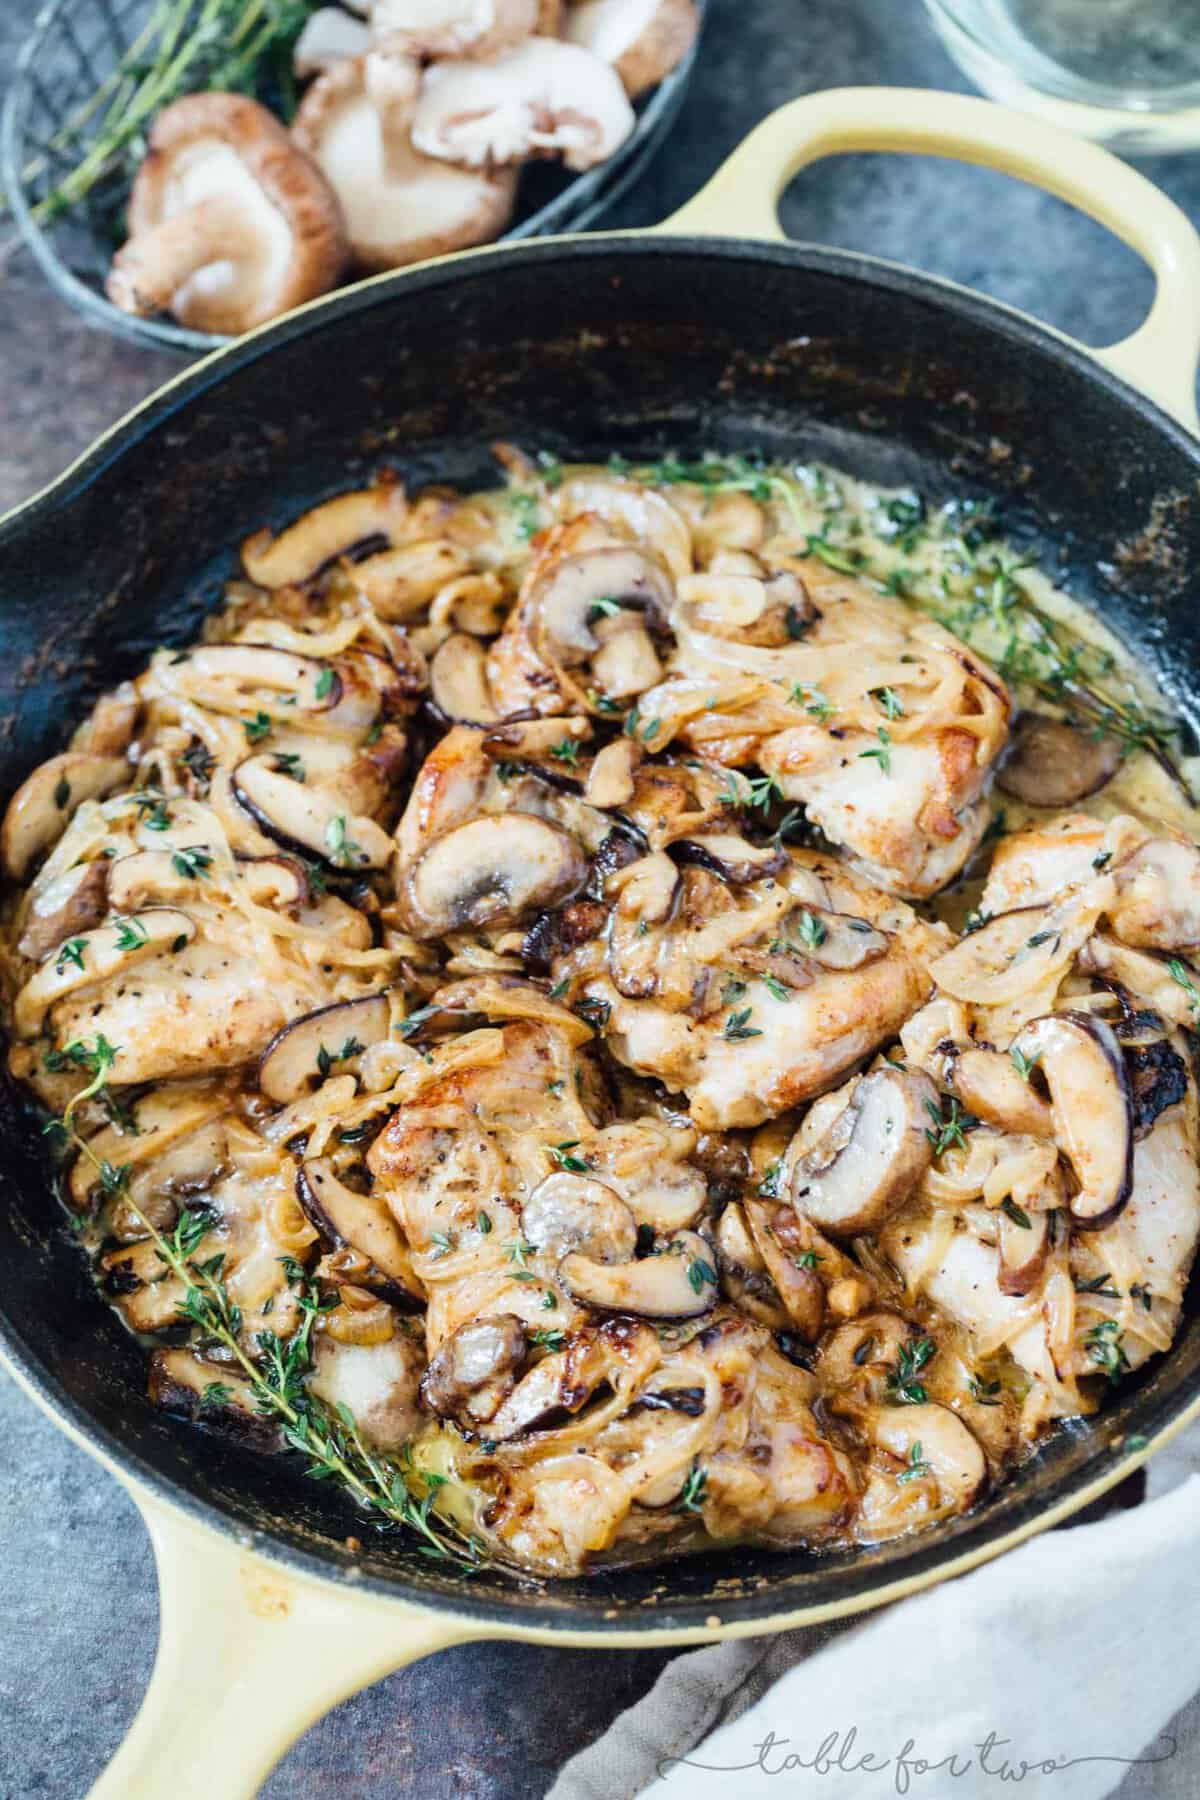 A delicious creamy skillet mushroom chicken that will make any evening fancy and full of flavor!